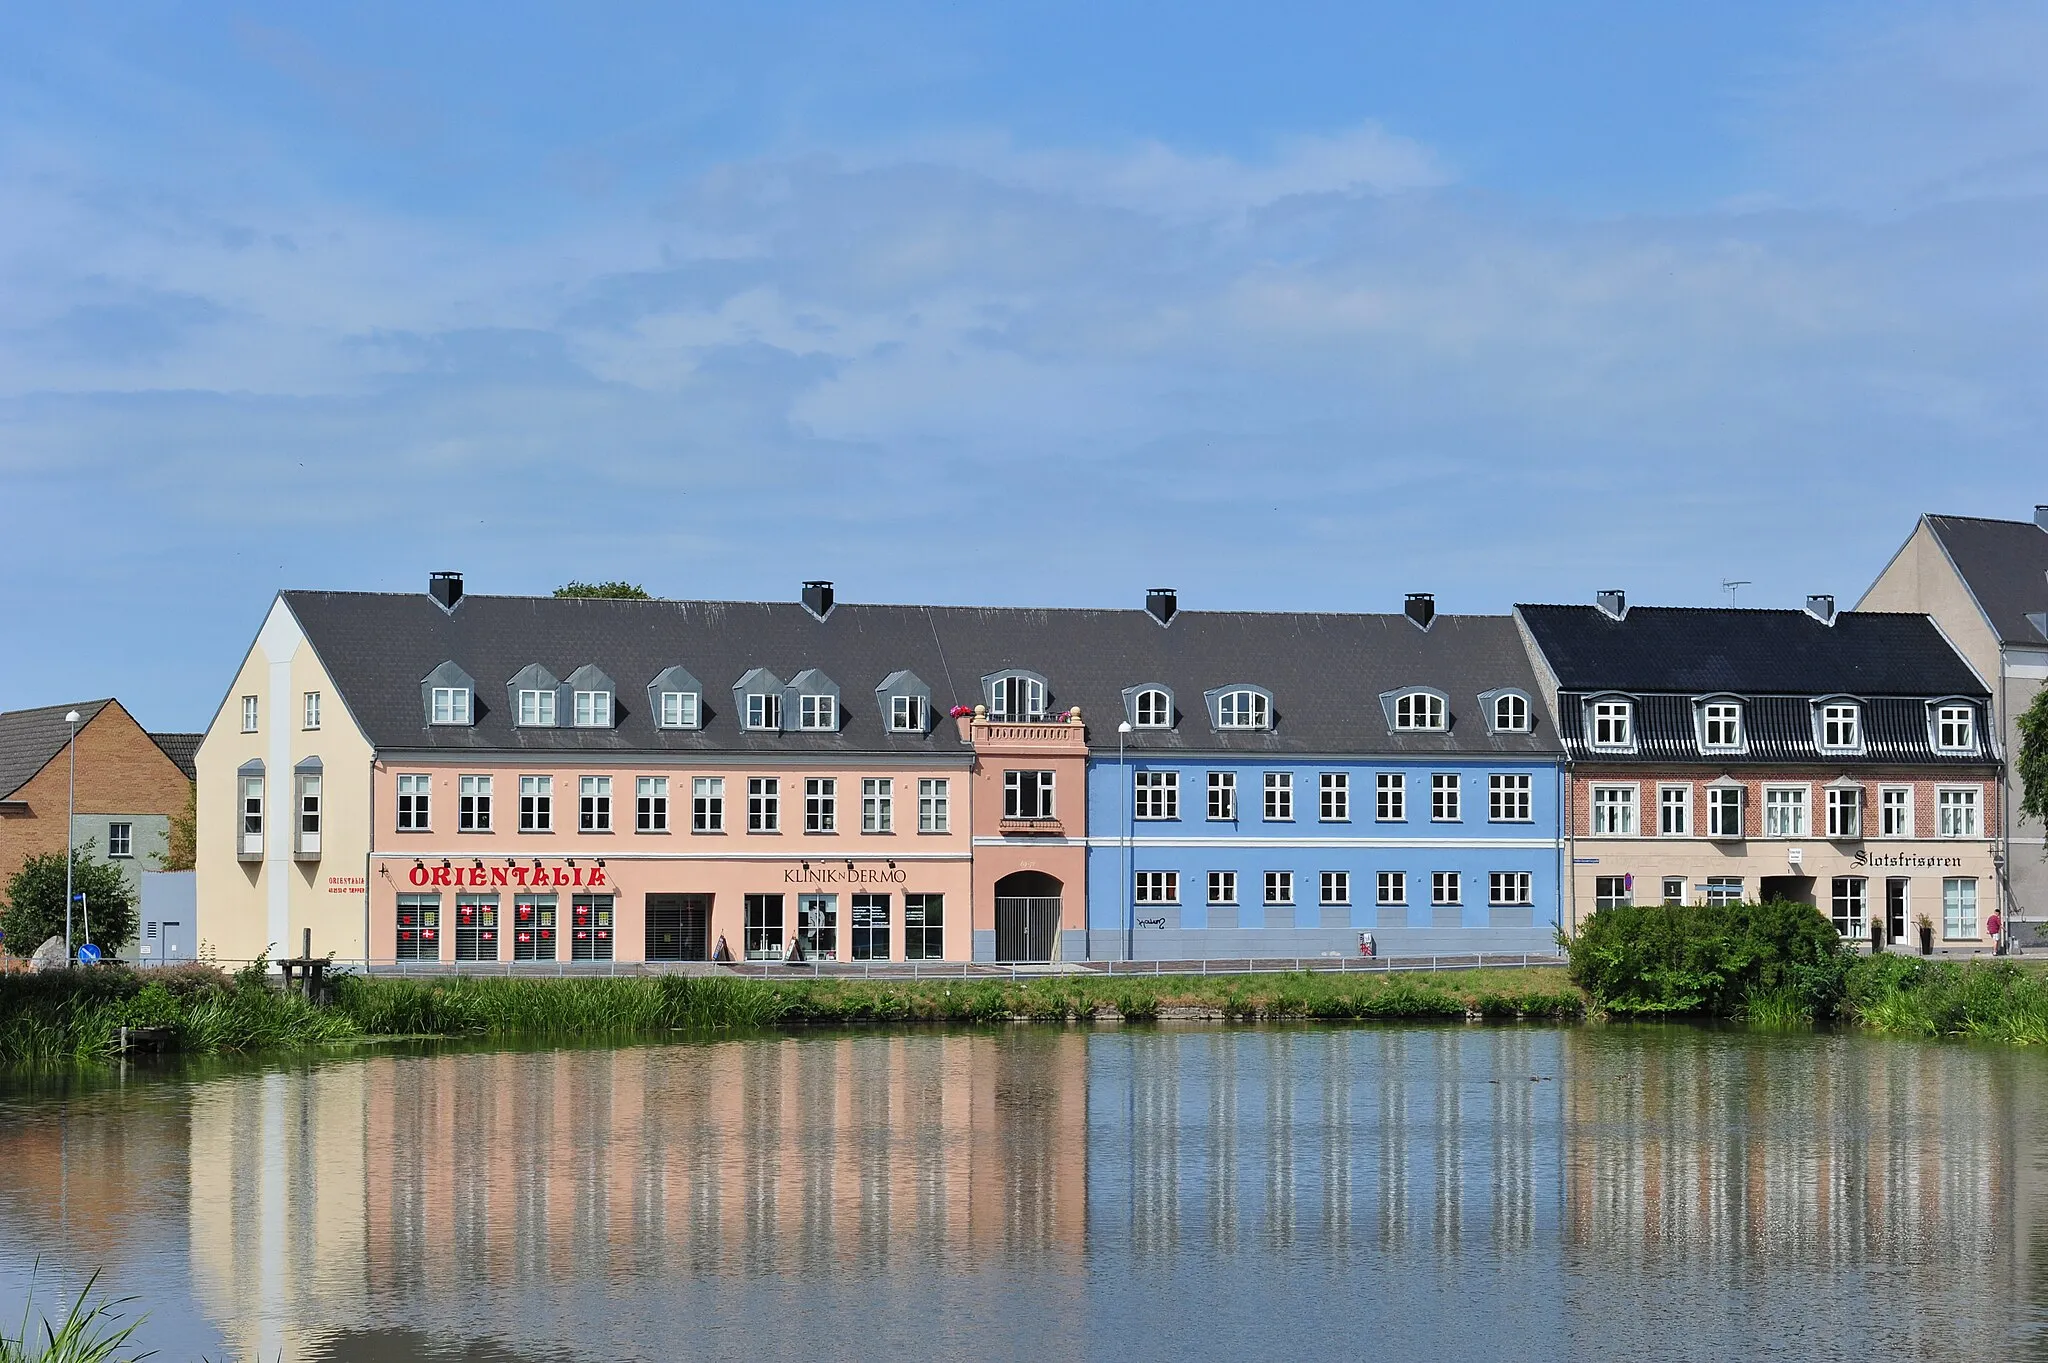 Photo showing: A row of houses in Hillerd, Denmark